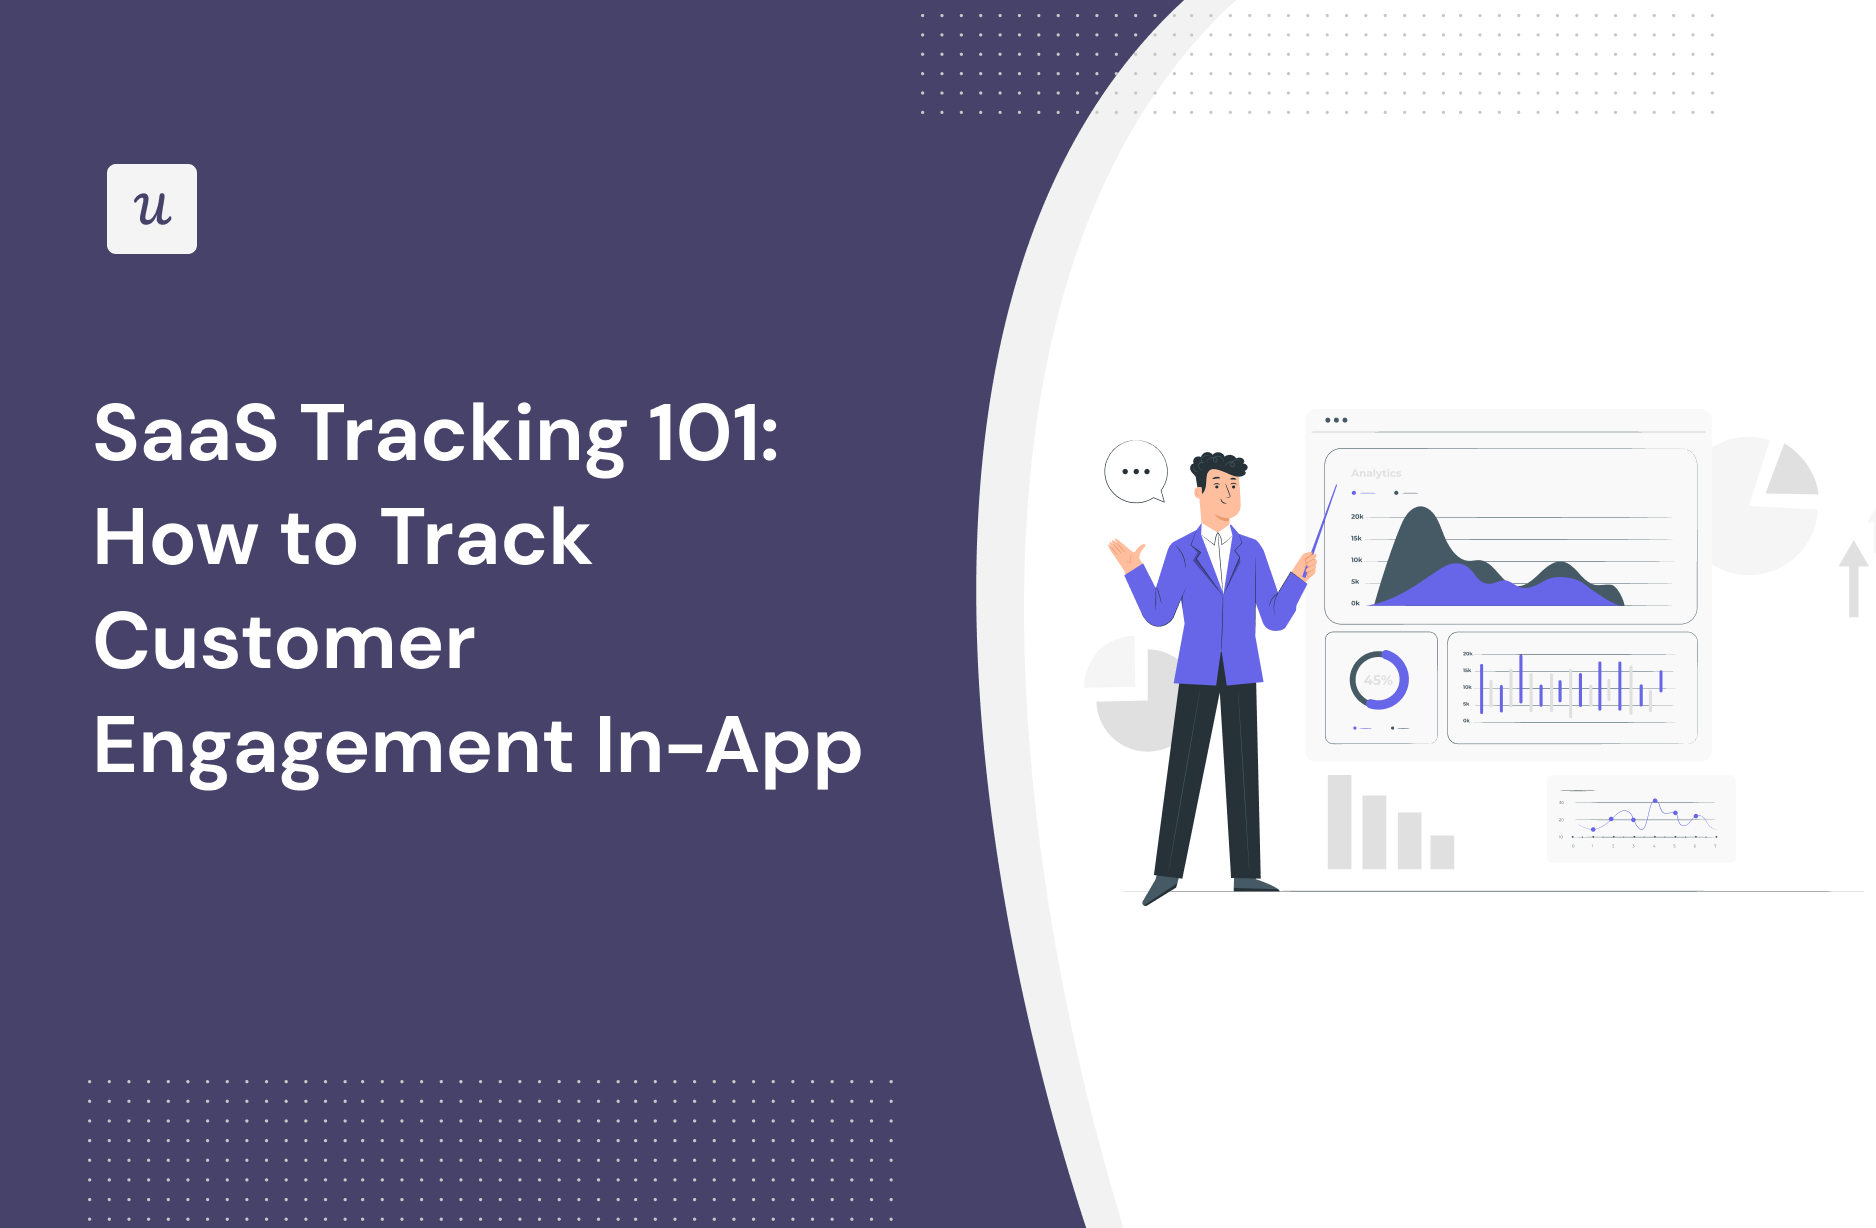 SaaS Tracking 101: How to Track Customer Engagement In-App